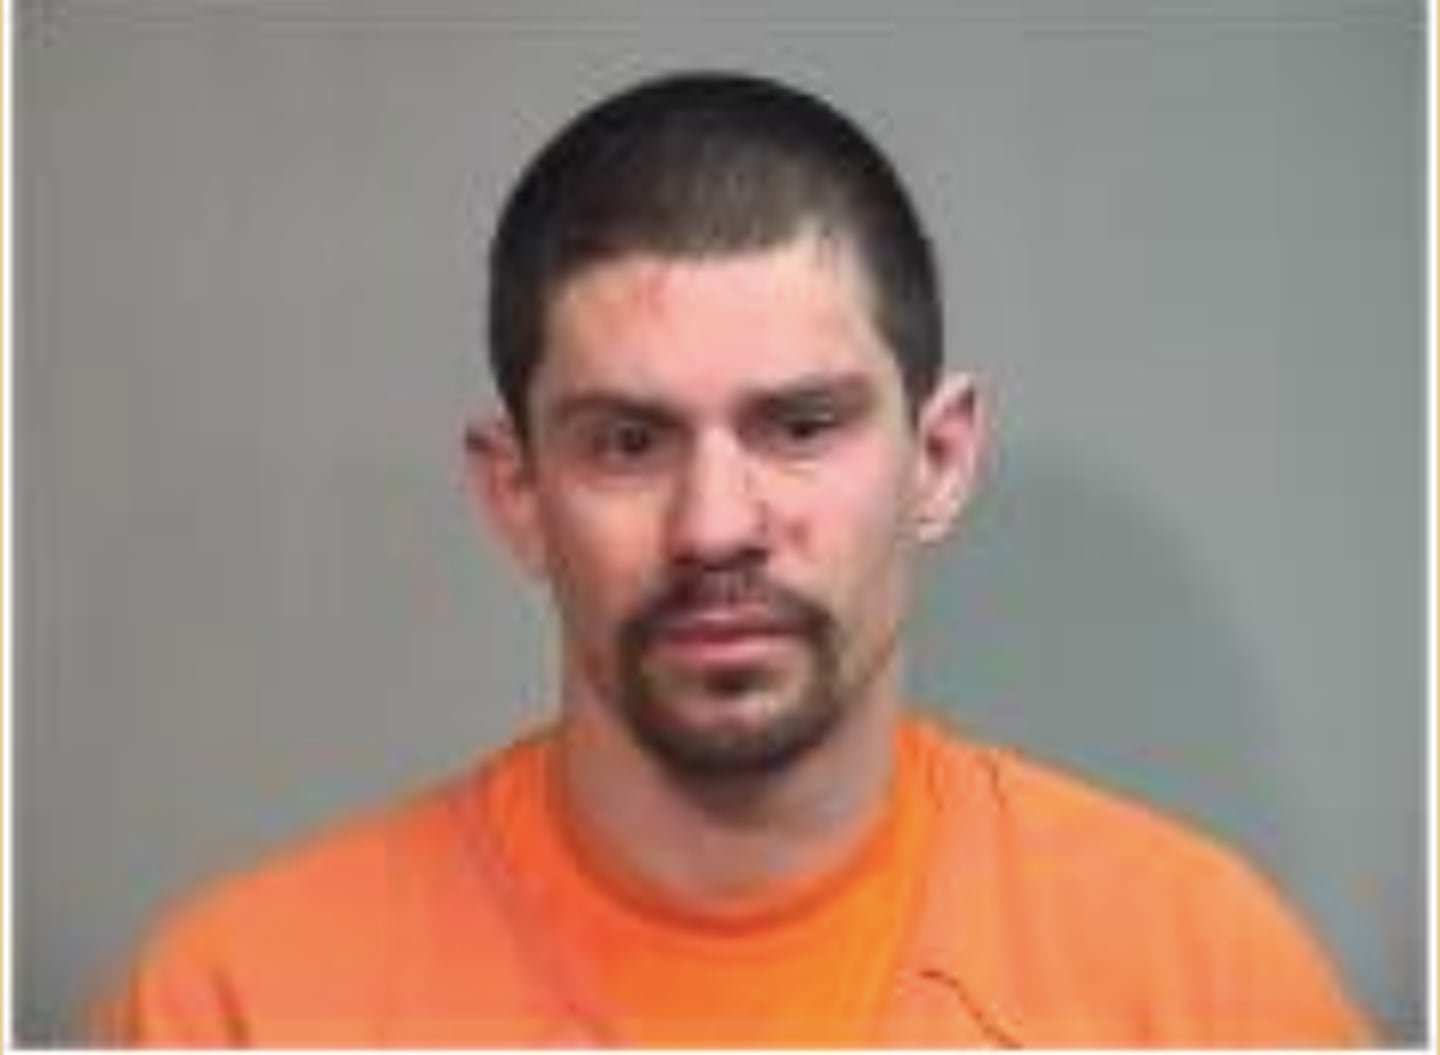 Michael A. Schallmoser, 35, of the 2200 block of Candlewick Drive, Poplar Grove, was arrested in the altercation and charged with aggravated battery in a public place, with a deadly weapon and causing great bodily harm.